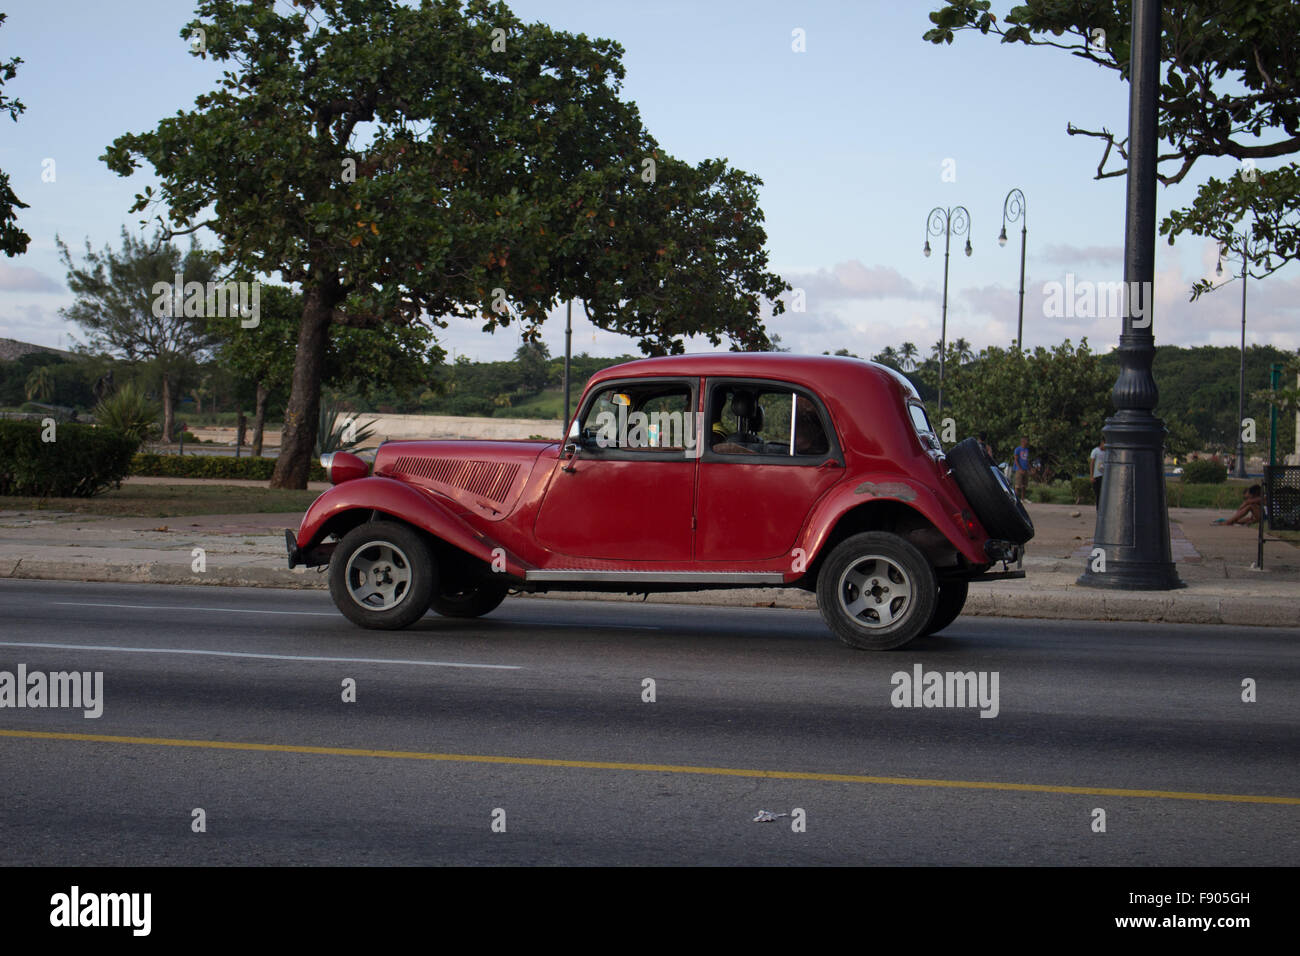 People are driving an old red car in Cuba. They are in Habana Stock Photo